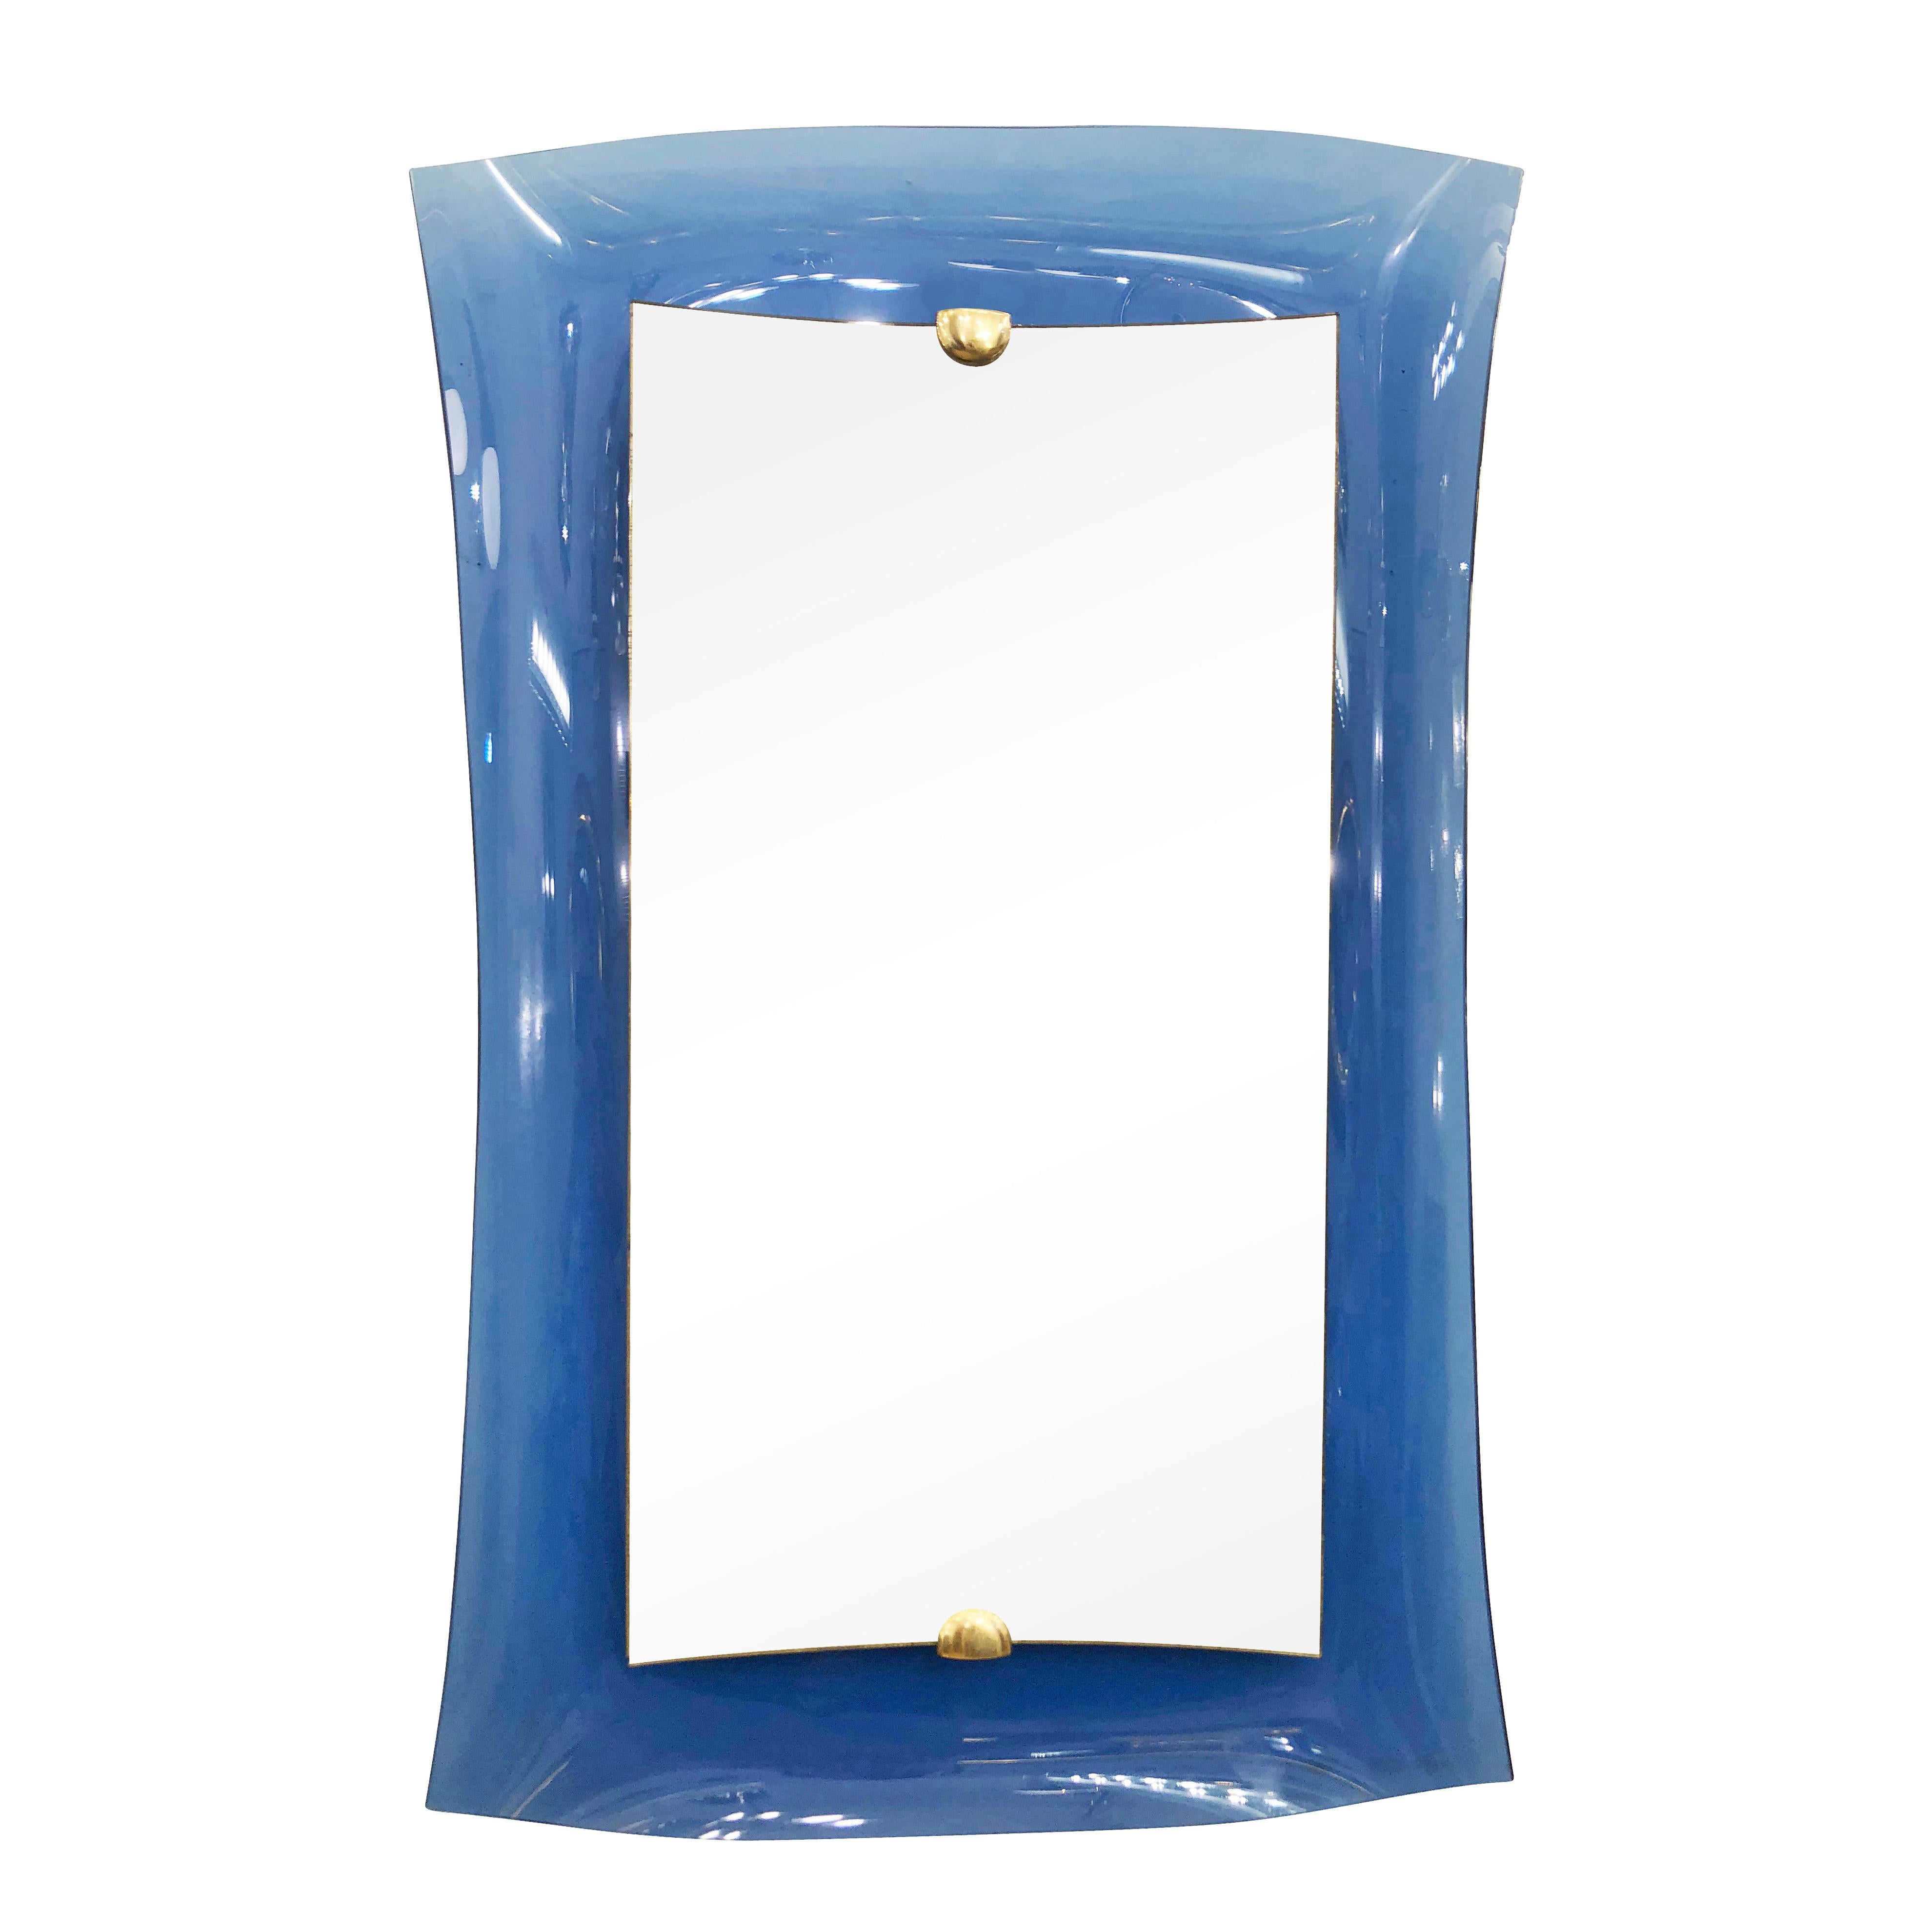 Midcentury mirror model 2712 by crystal Art. Features a concave blue glass frame with a raised glass center held by brass hardware.

Condition: Excellent vintage condition, minor wear consistent with age and use. Age spots to the edges of the